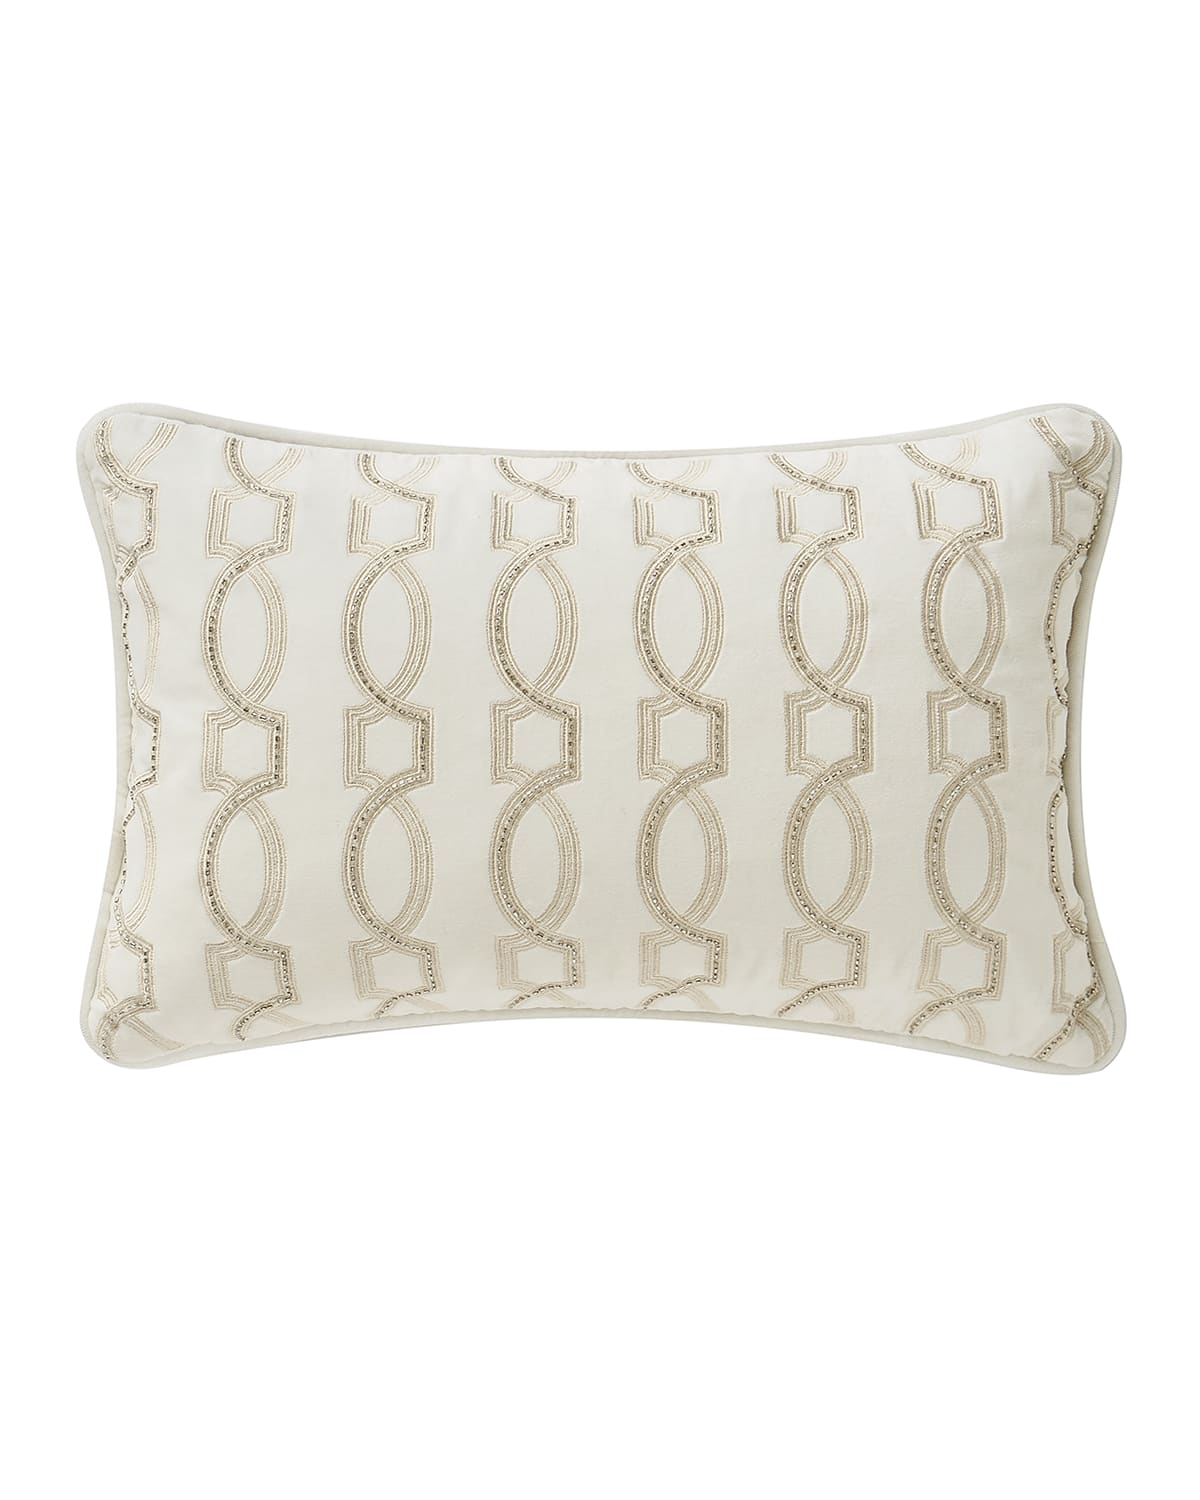 Image Waterford Lancaster Breakfast Decorative Pillow, 12" x 18"